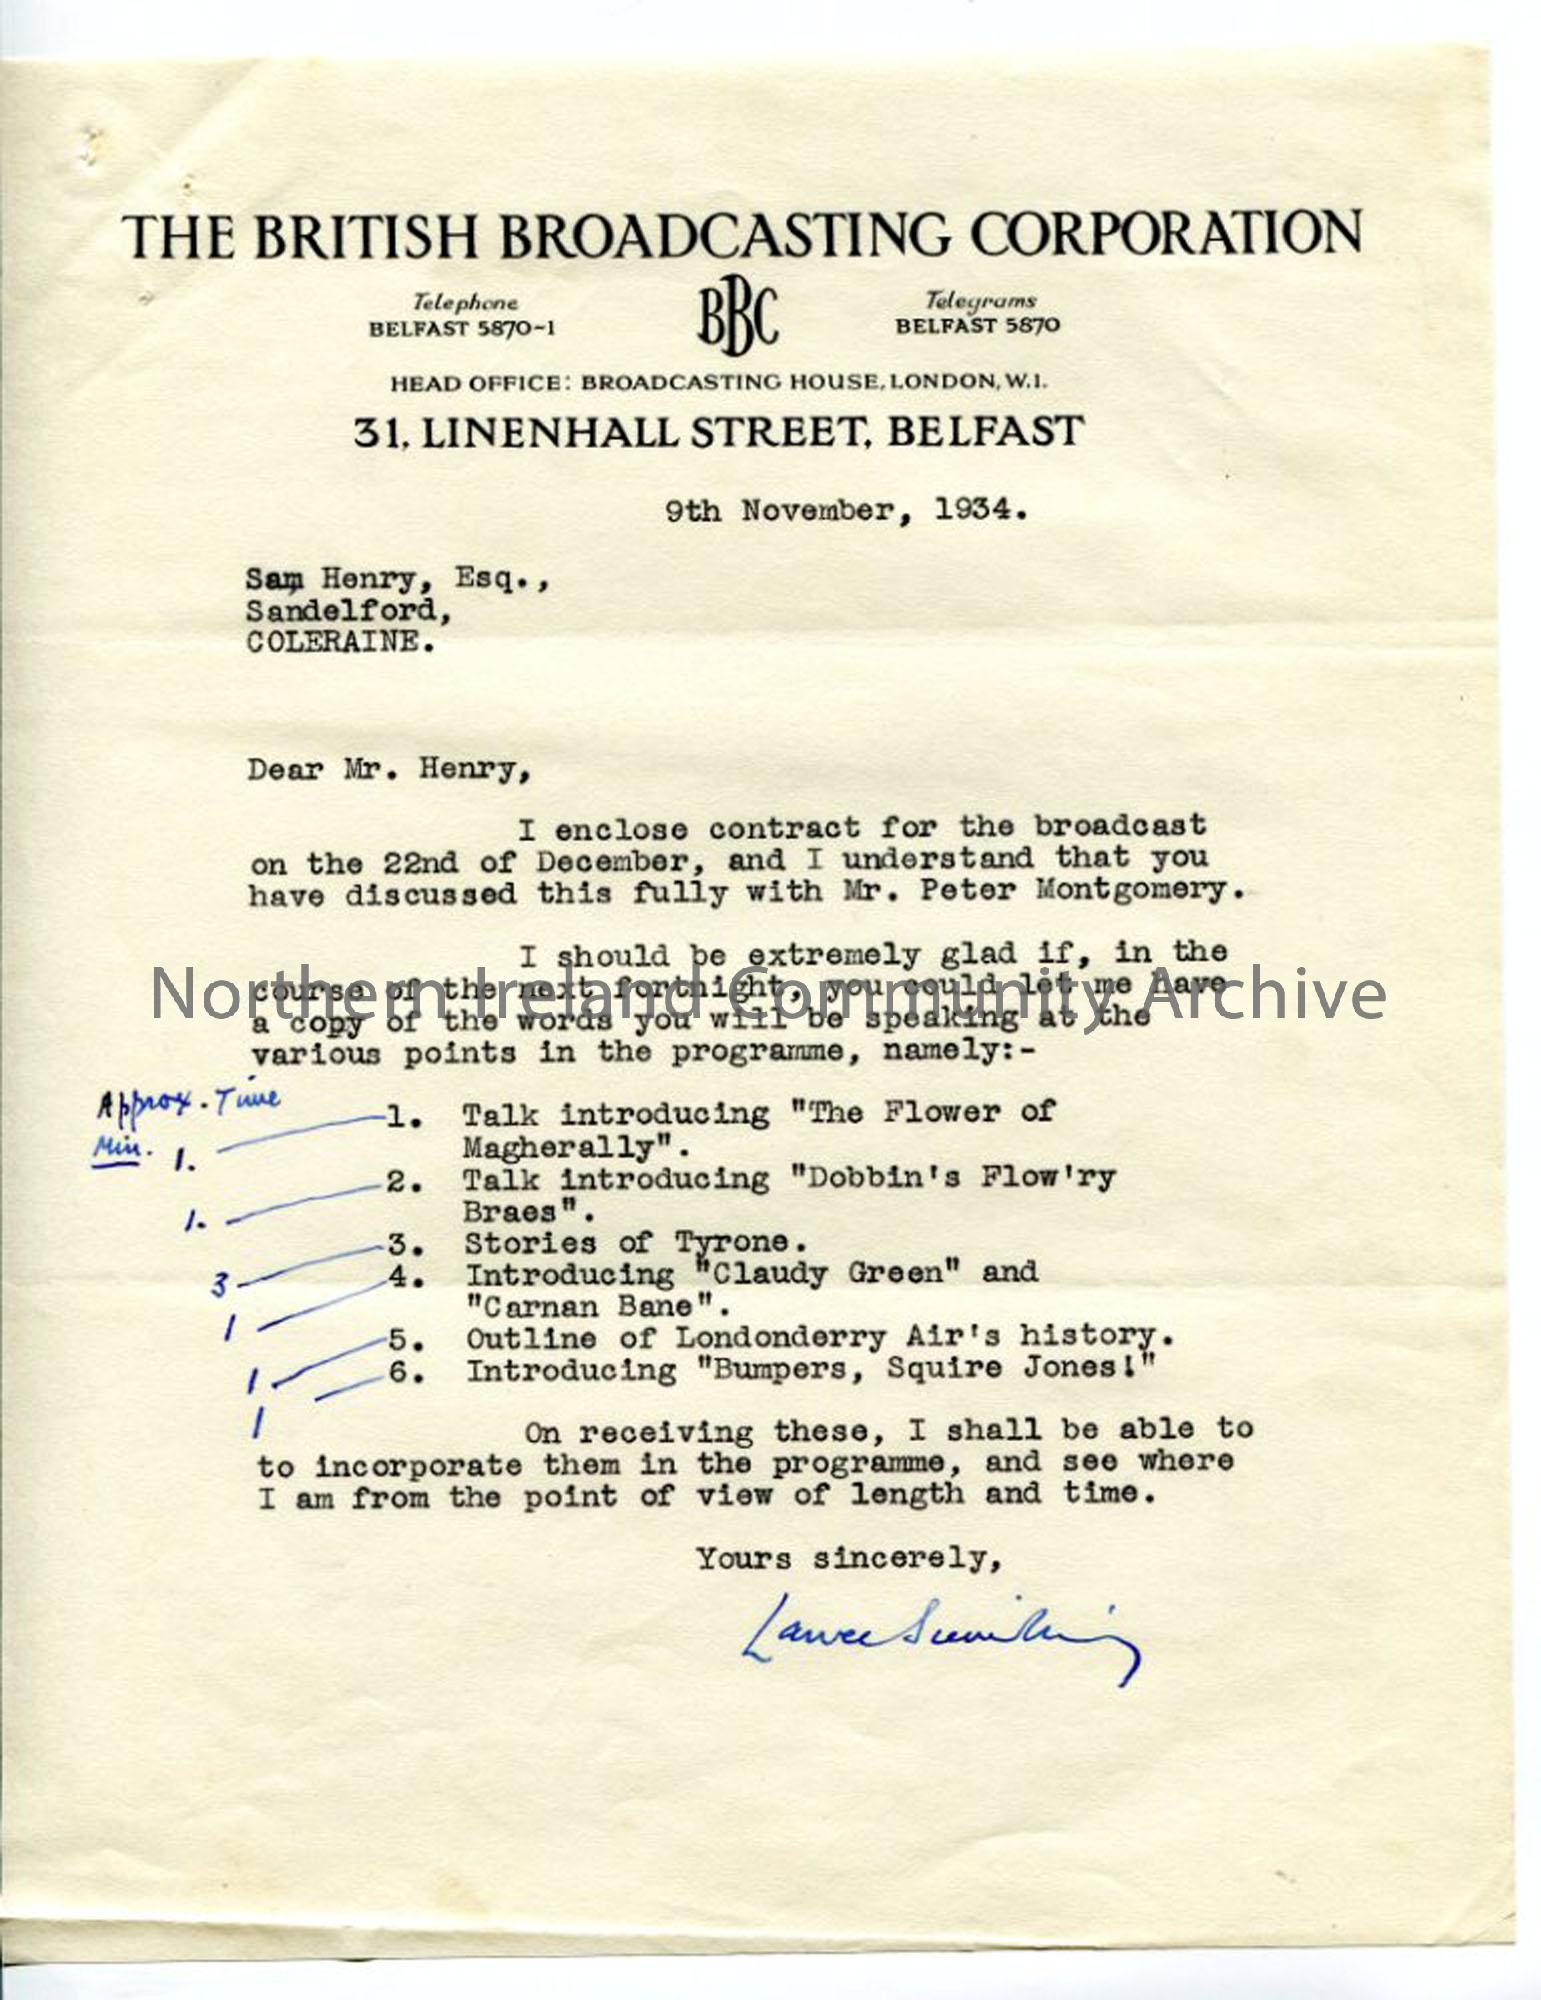 Letter from Lance Sieveking of the BBC, dated 9.11.1934